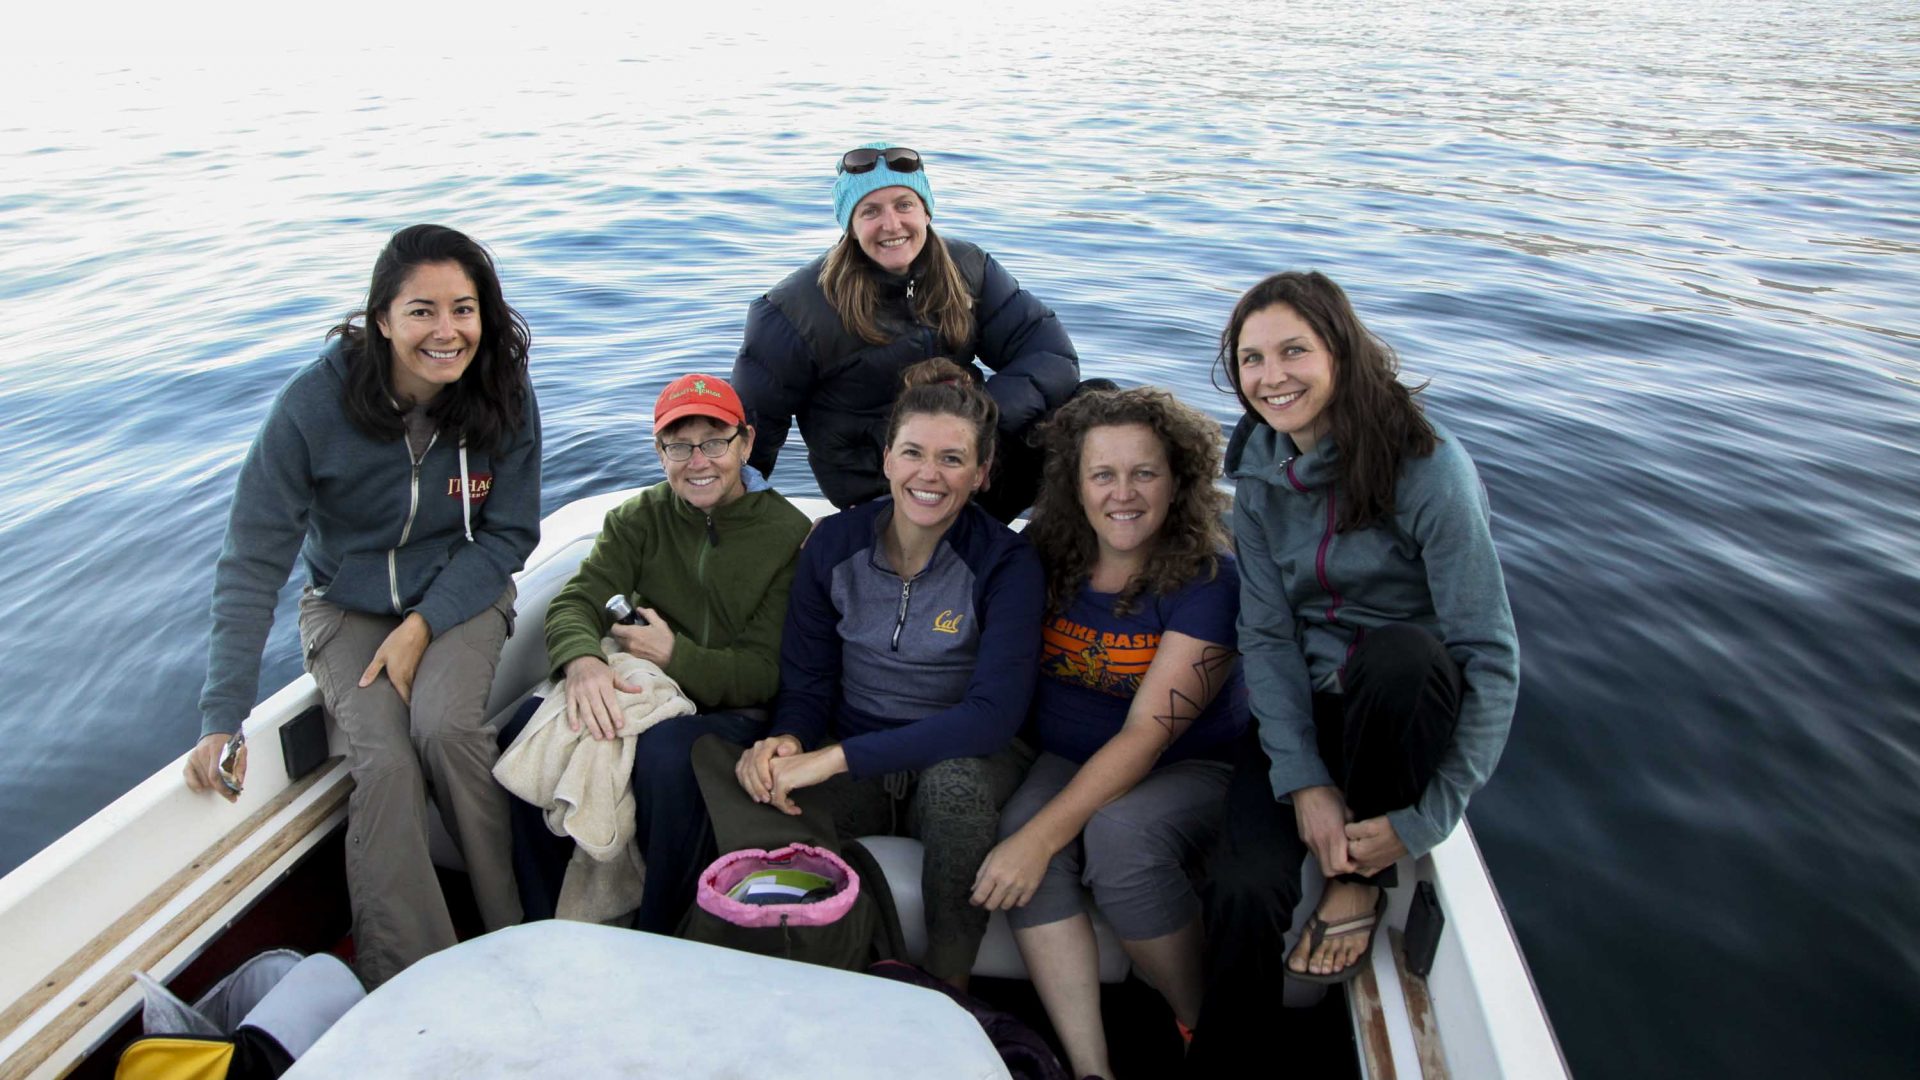 A group of female water quality scientists pose for a photo on a boat.